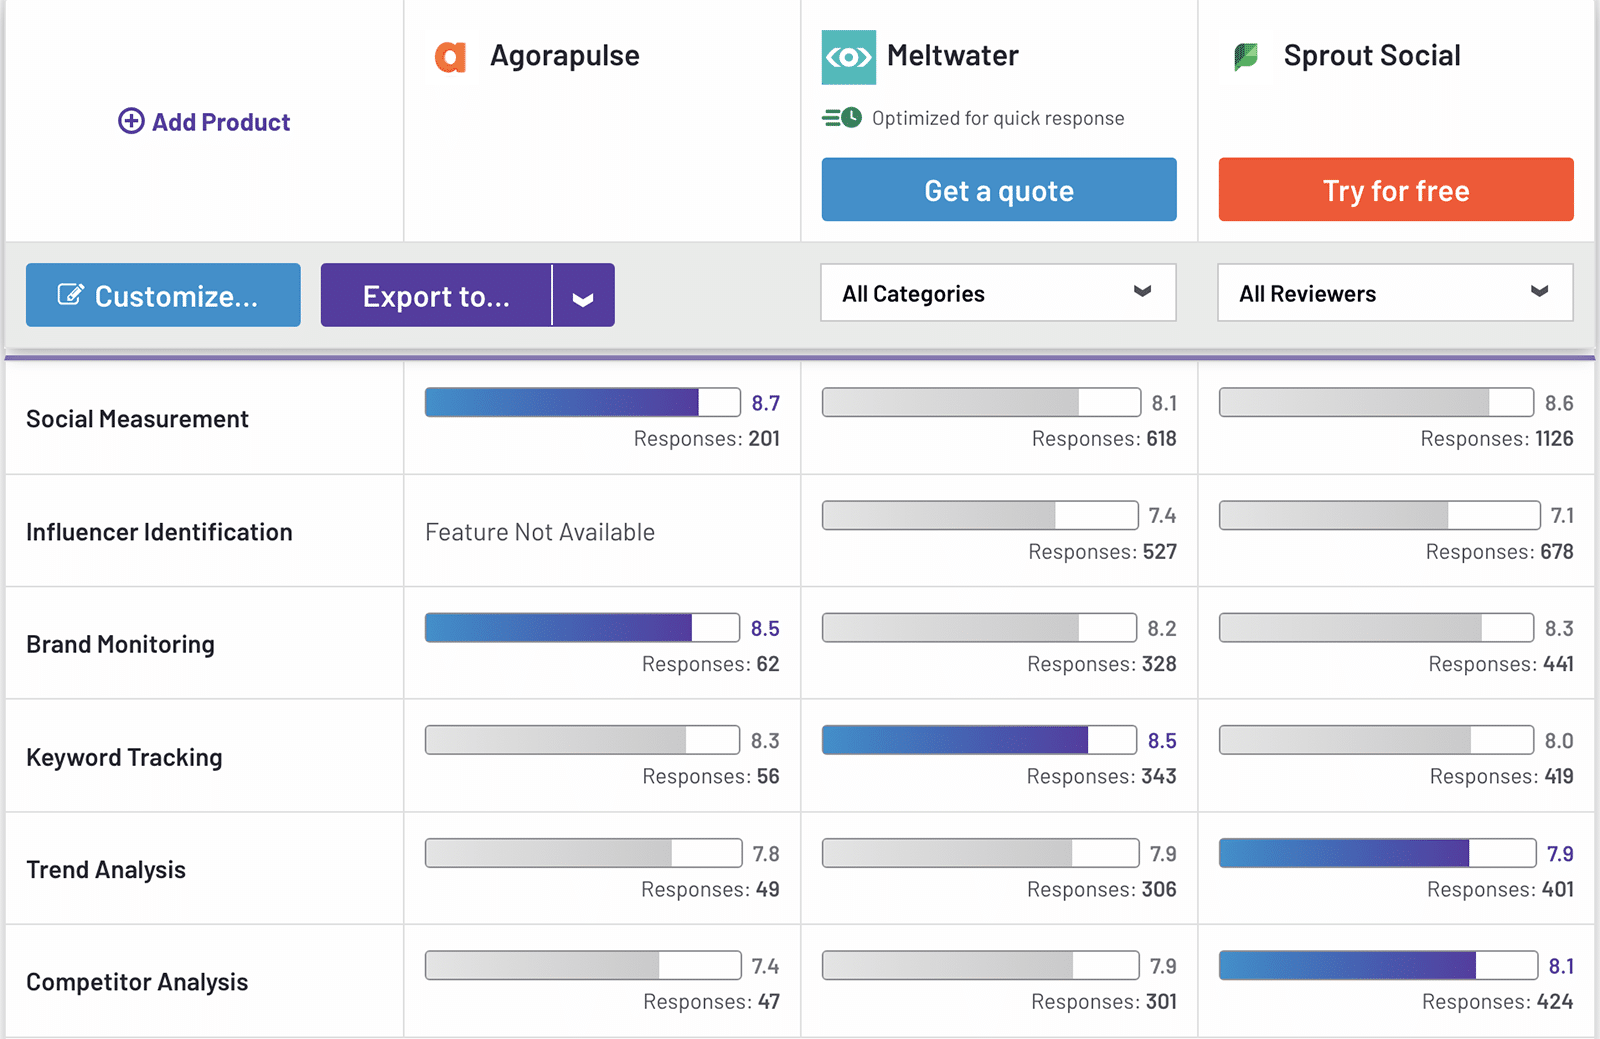 G2 comparison between Agorapulse, Meltwater, and Sprout Social showing social listening